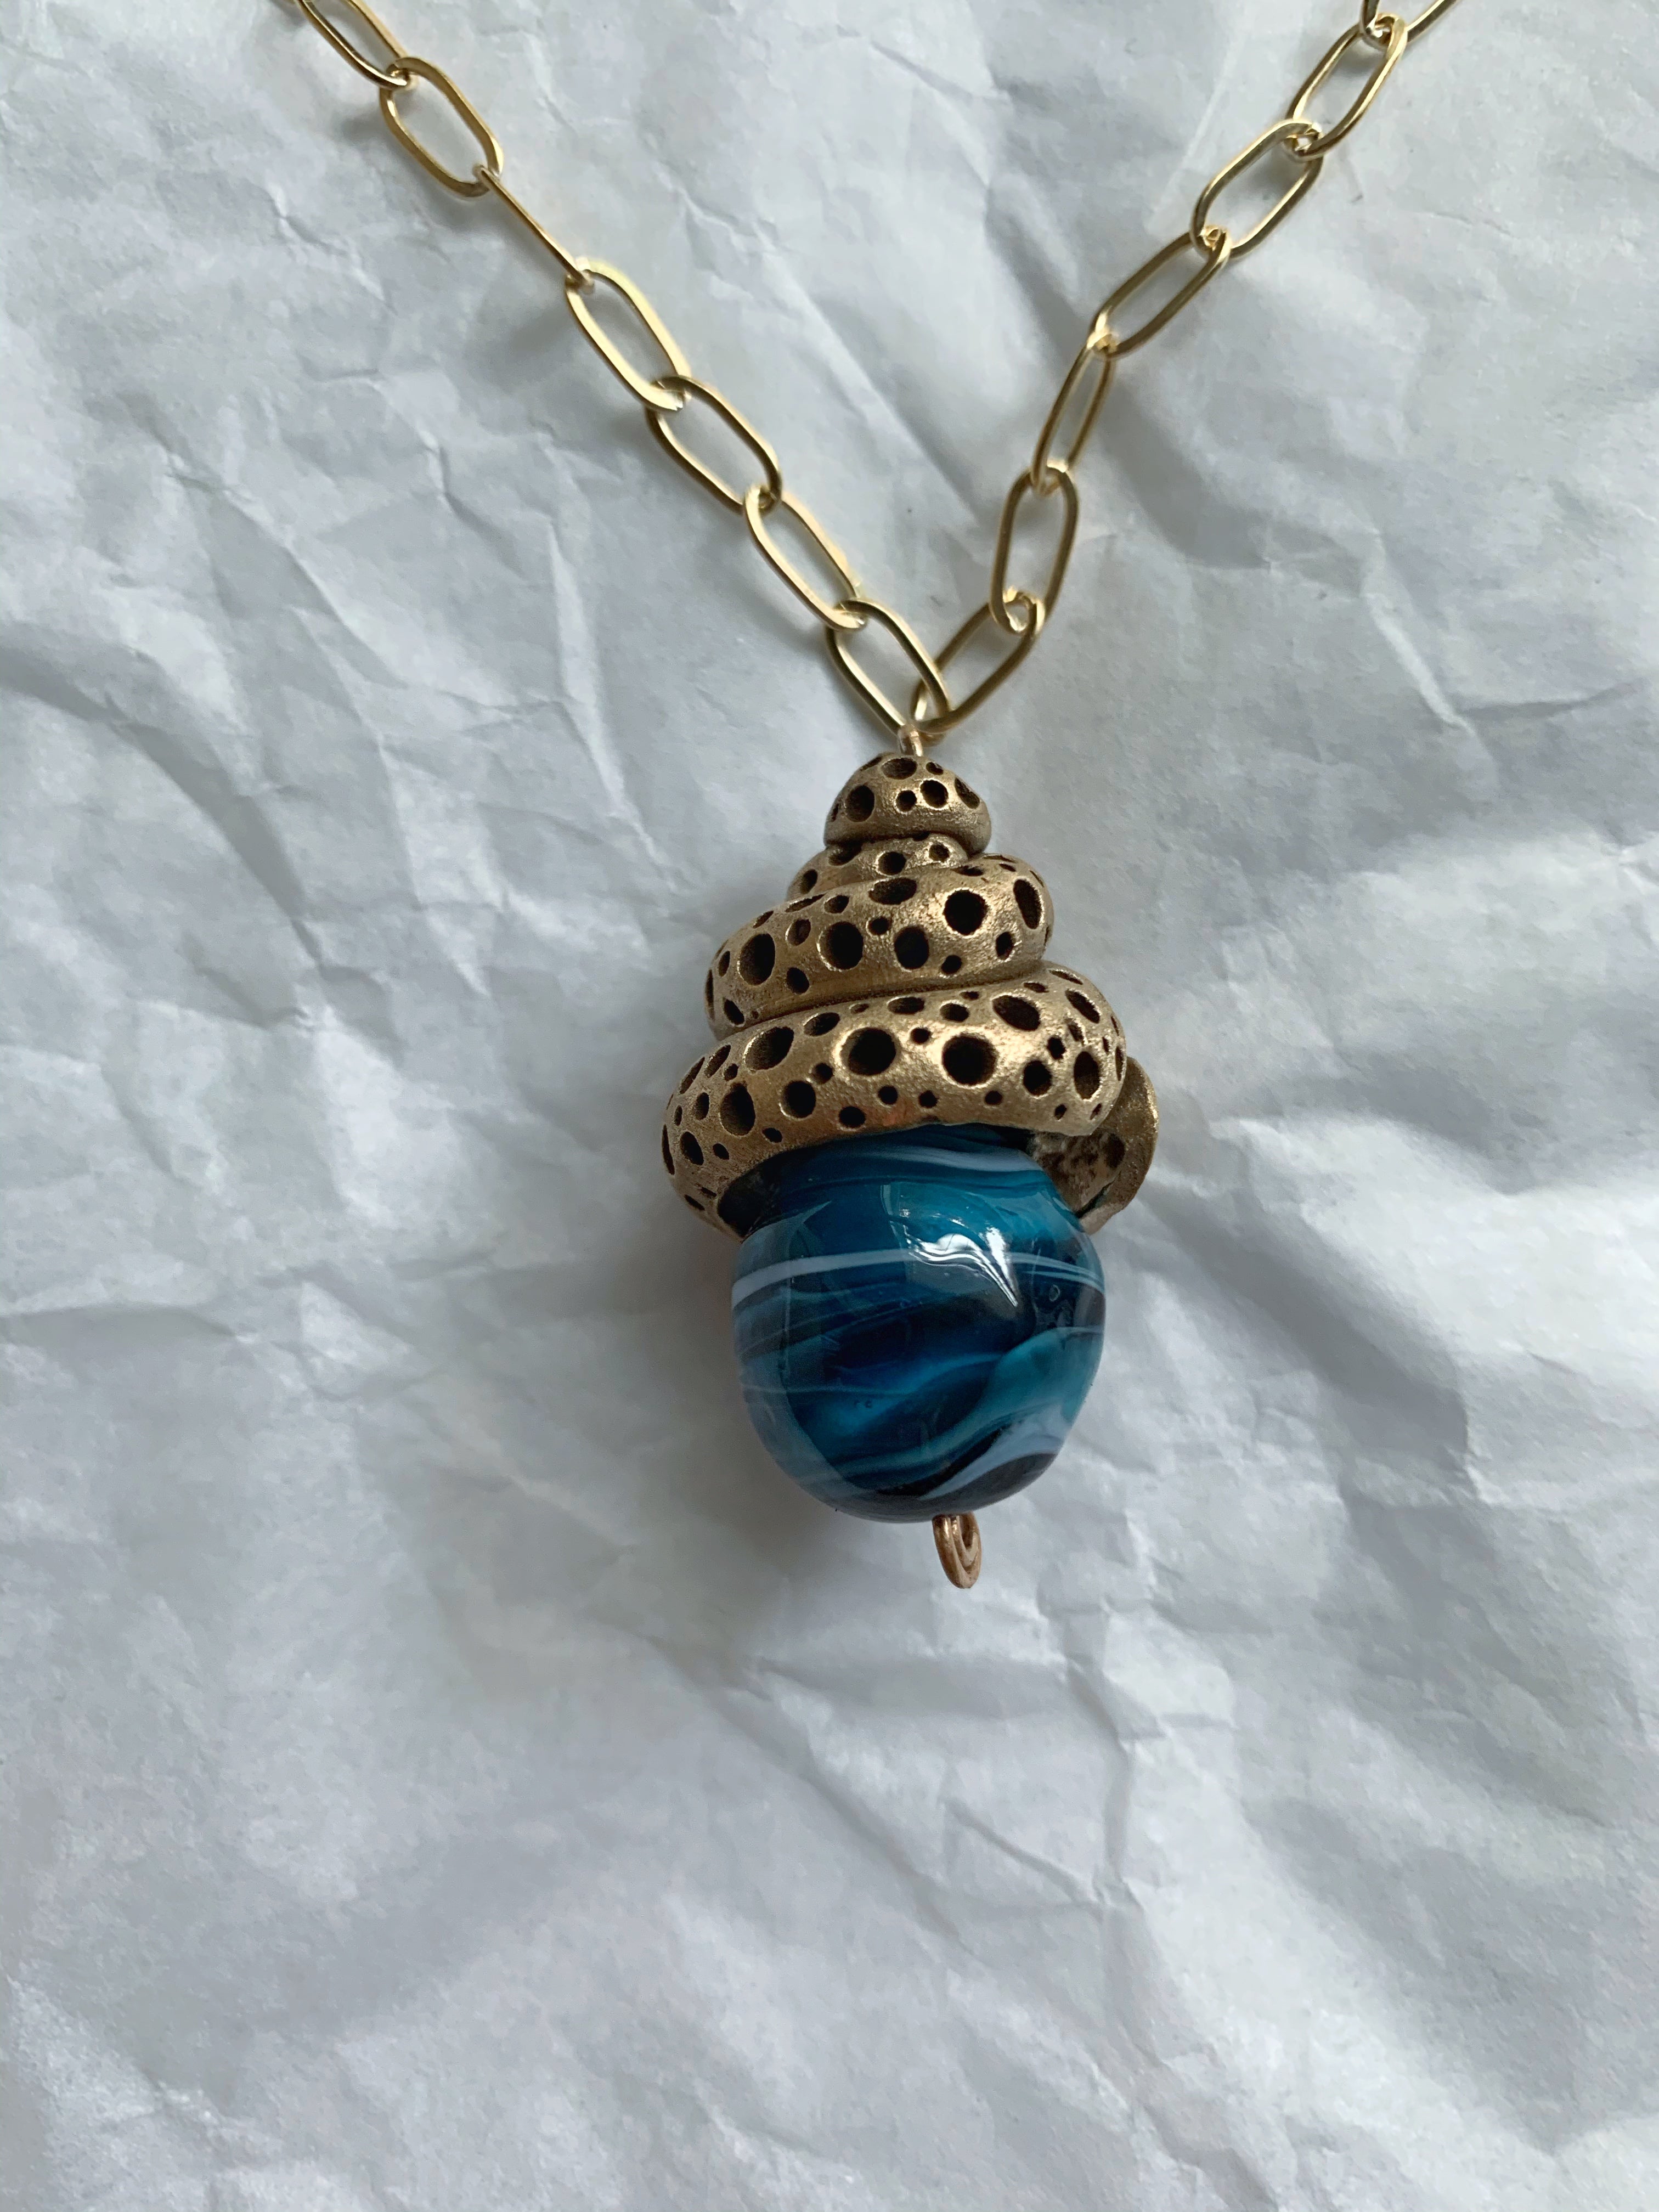 Artisan made ocean inspired bronze and glass necklace